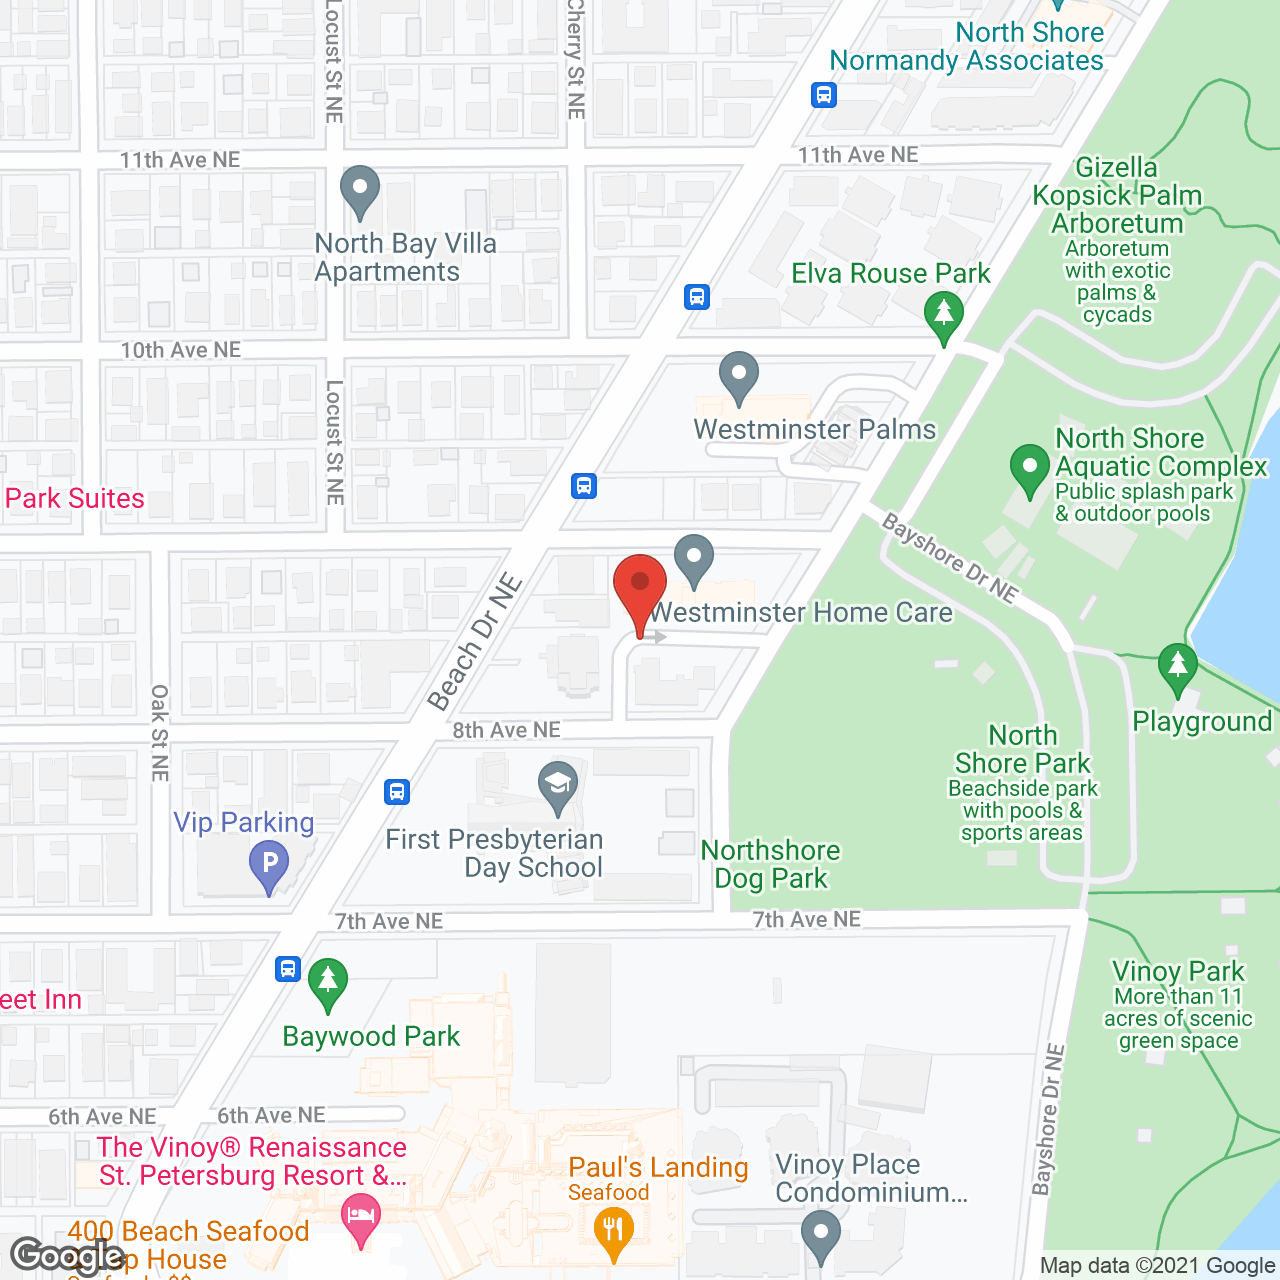 Westminster Palms in google map